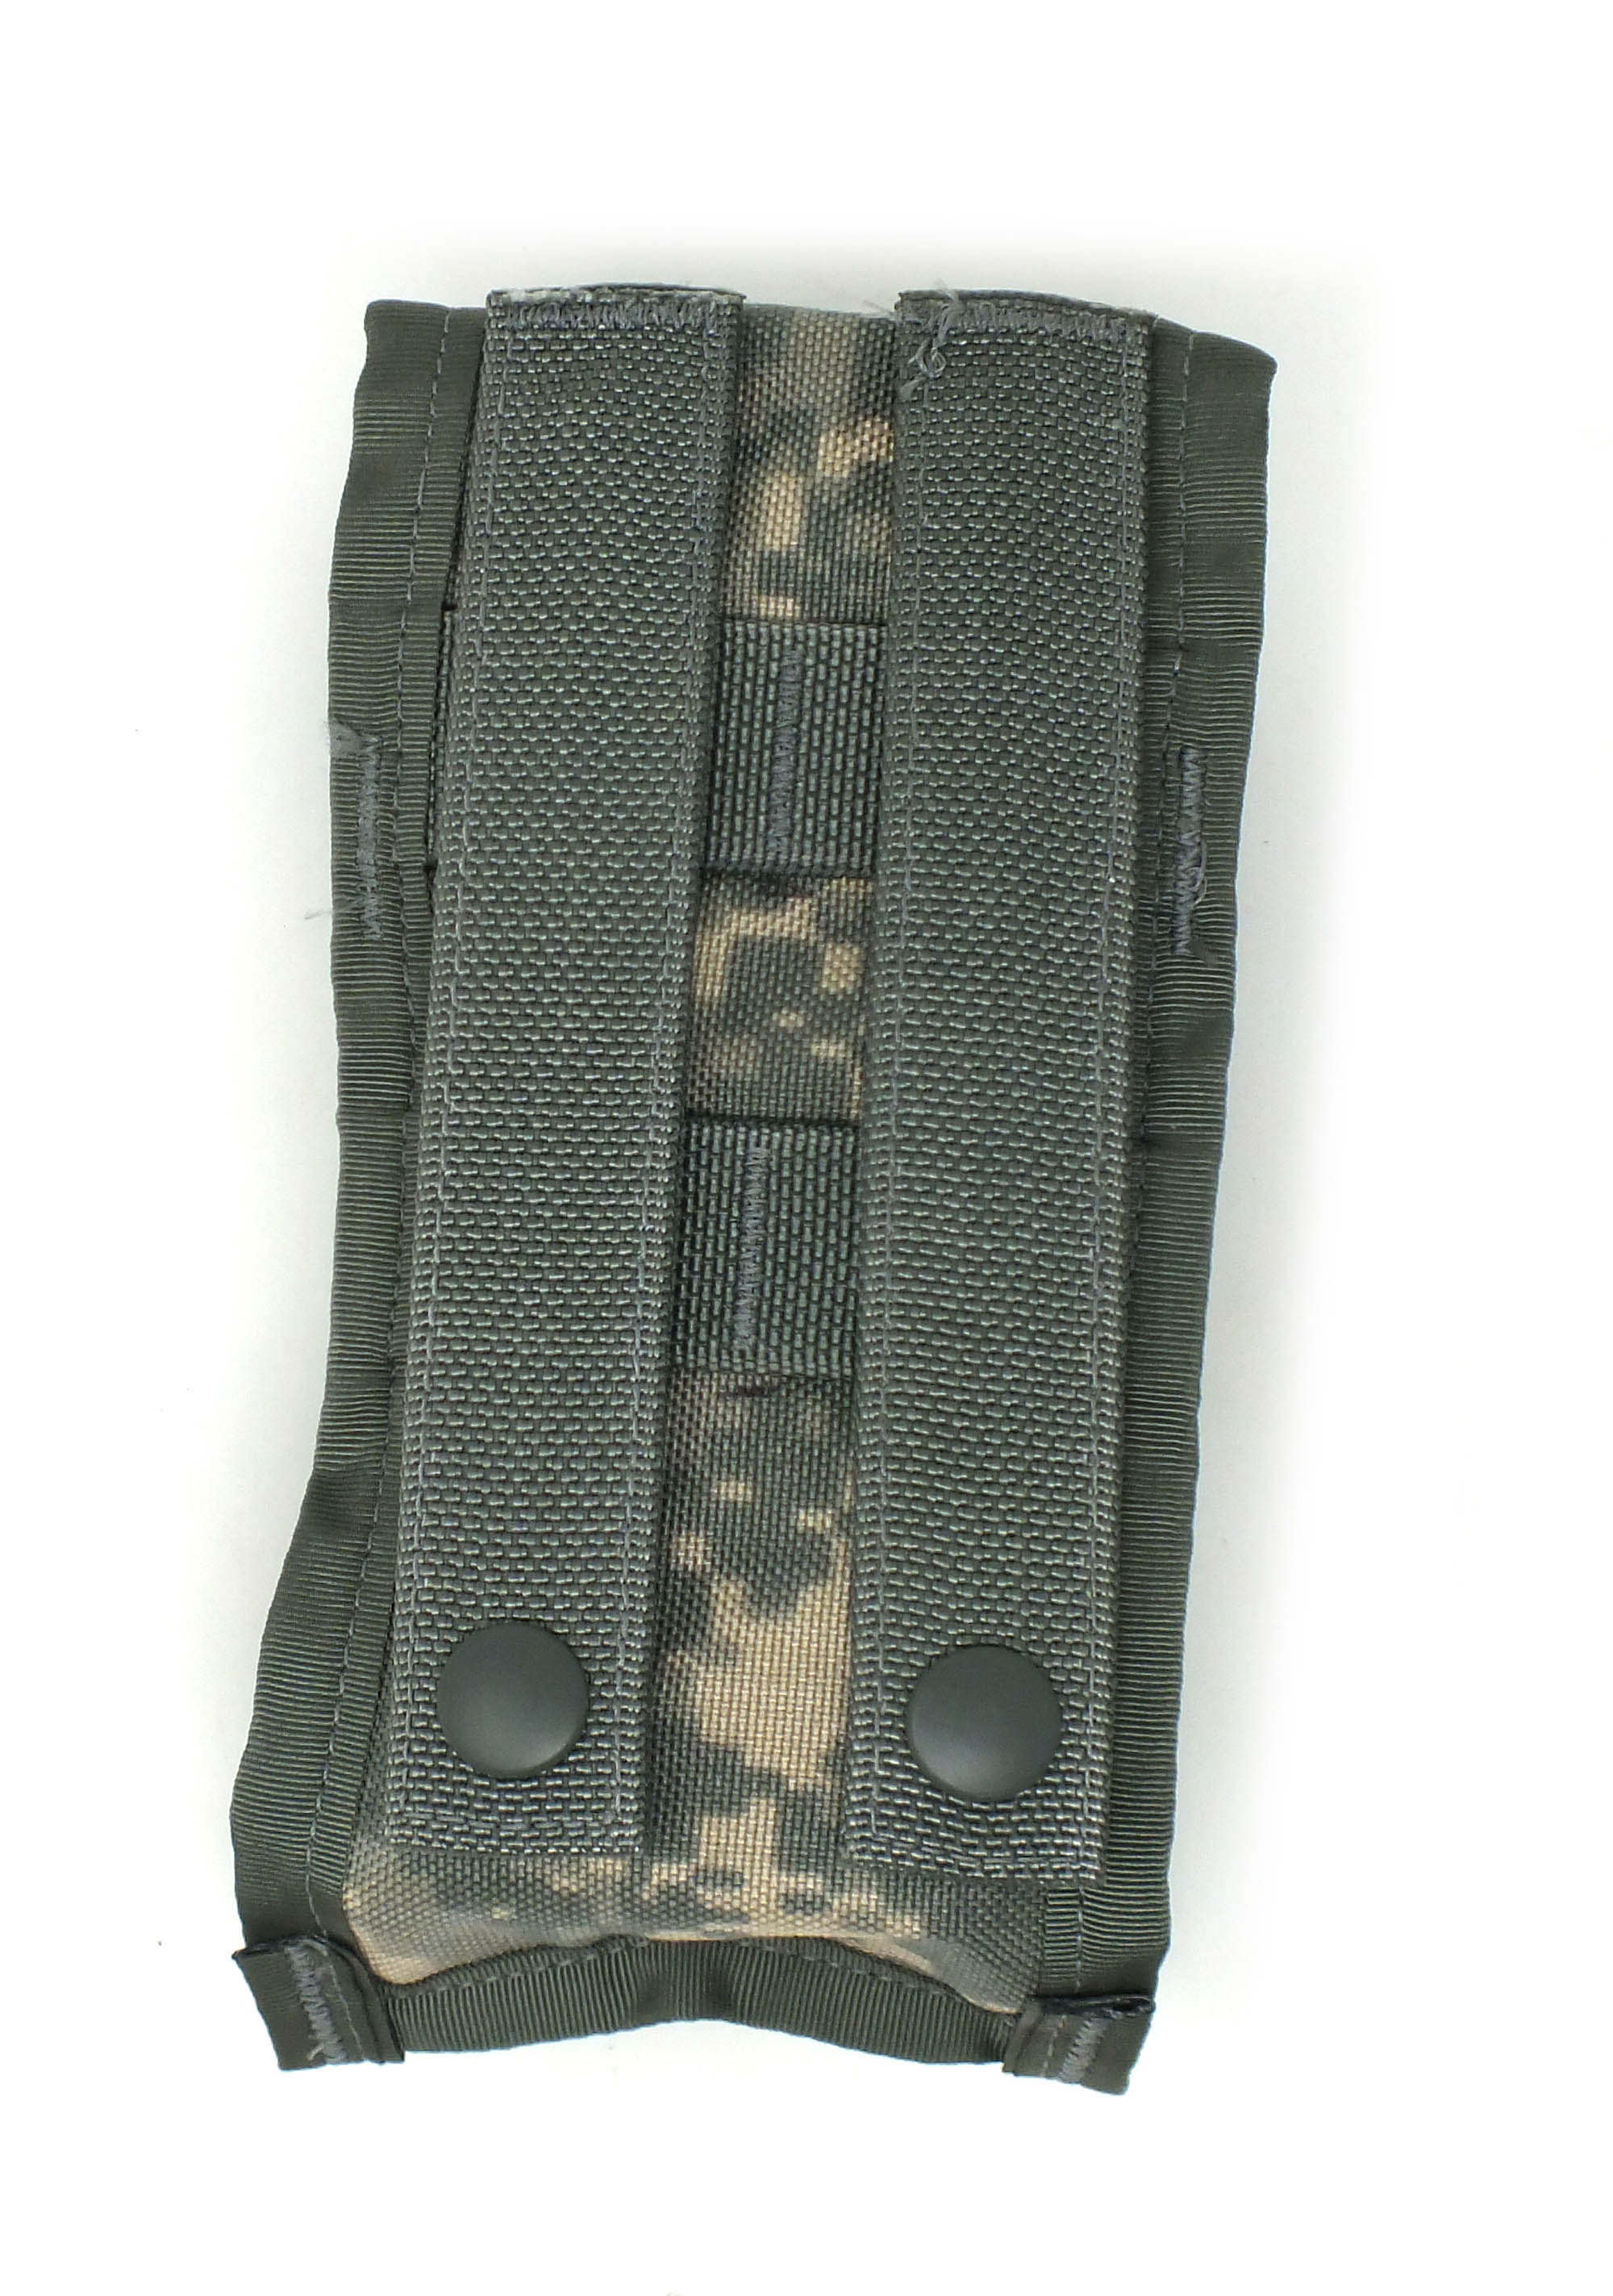 US ARMY Double Magazin Ucp Molle Ammo Pouch Acu Tasche At Digital 